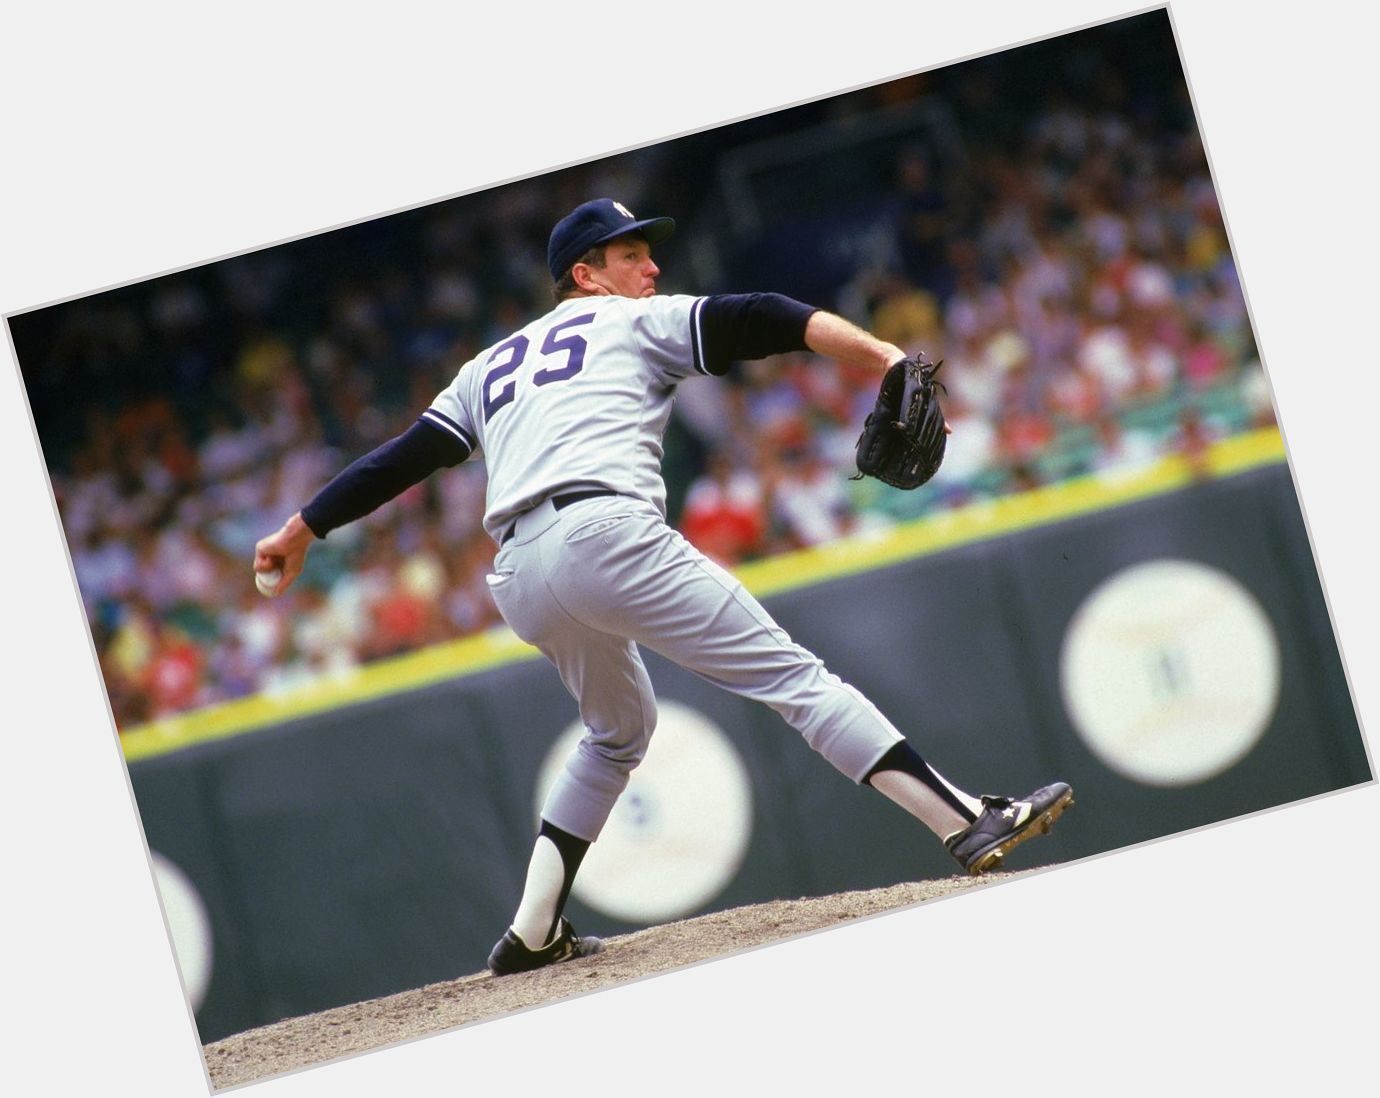 Happy 77th birthday Tommy John!

He is the last Yankee pitcher to win 20+ games in consecutive seasons (1979-1980) 